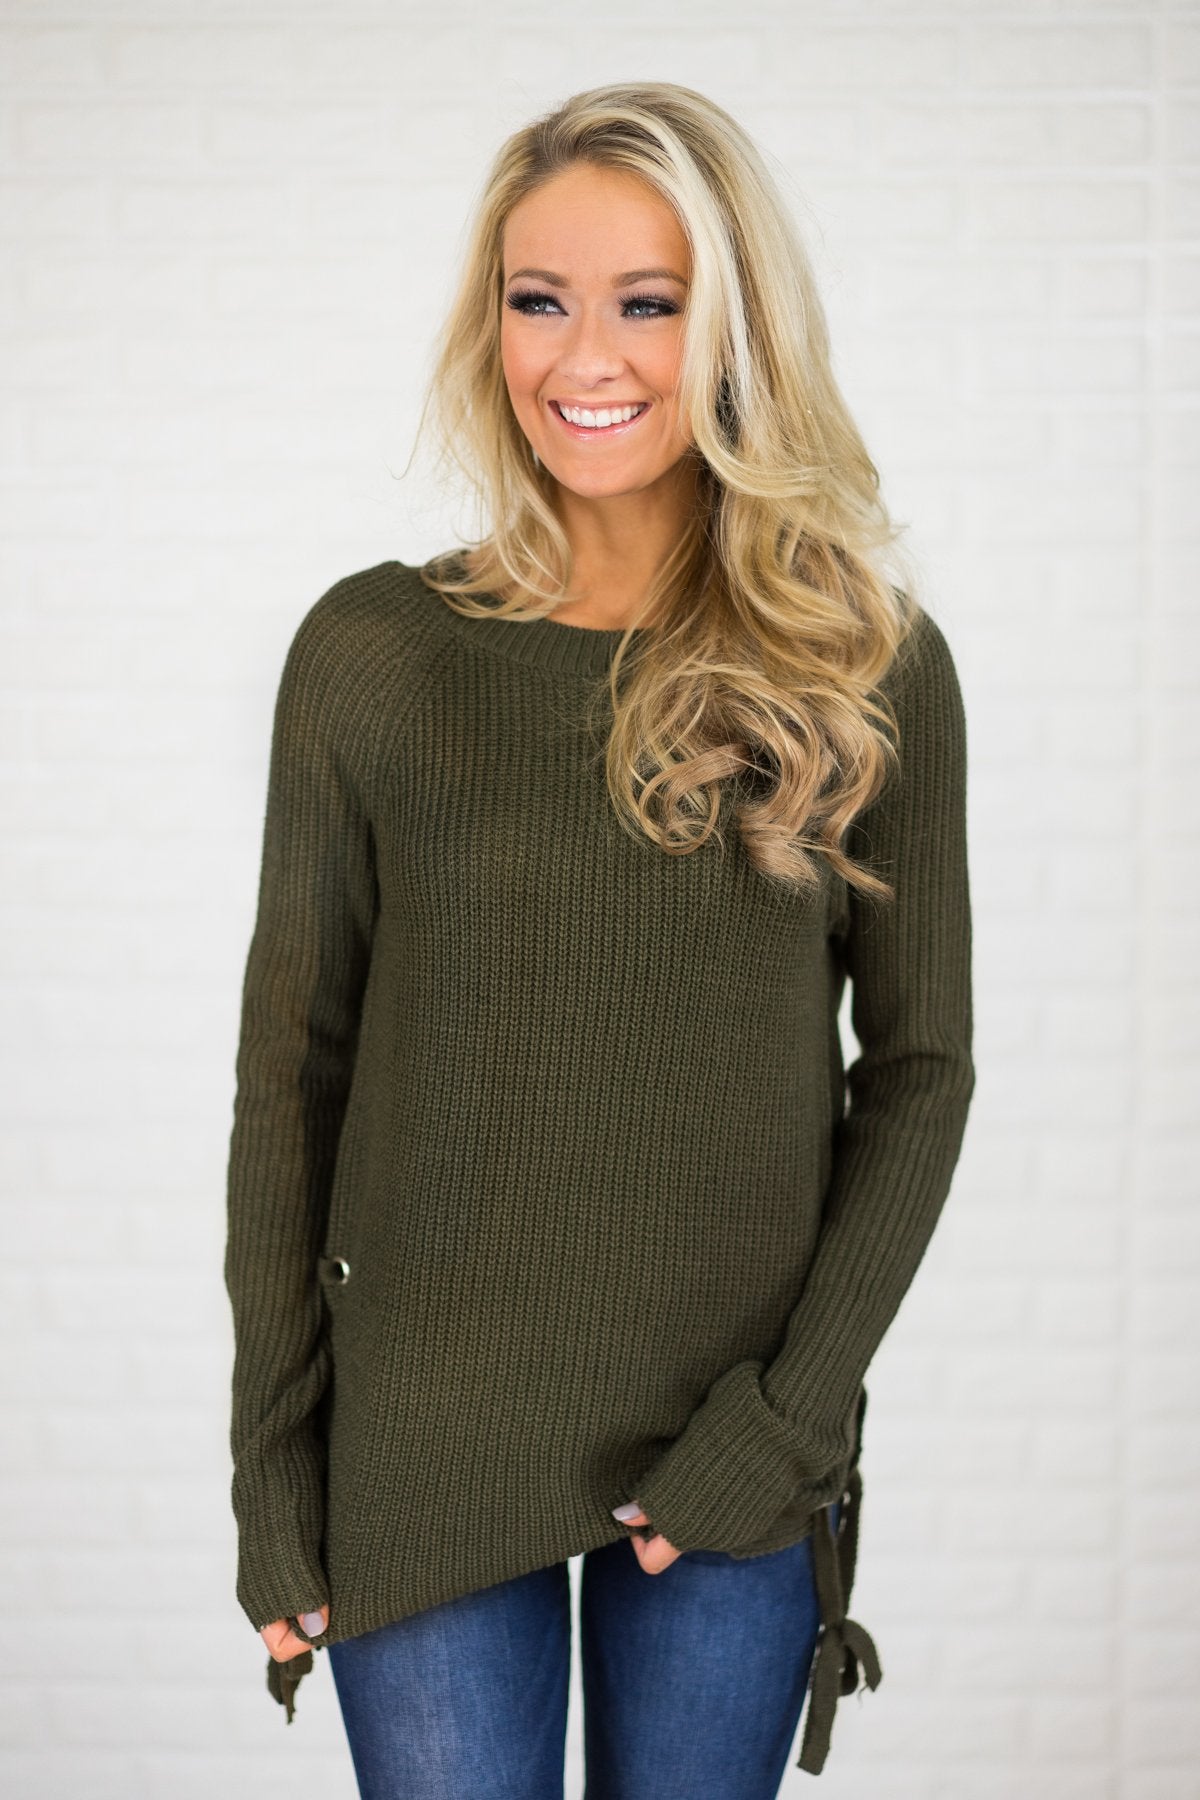 Olive Side Lace Up Top